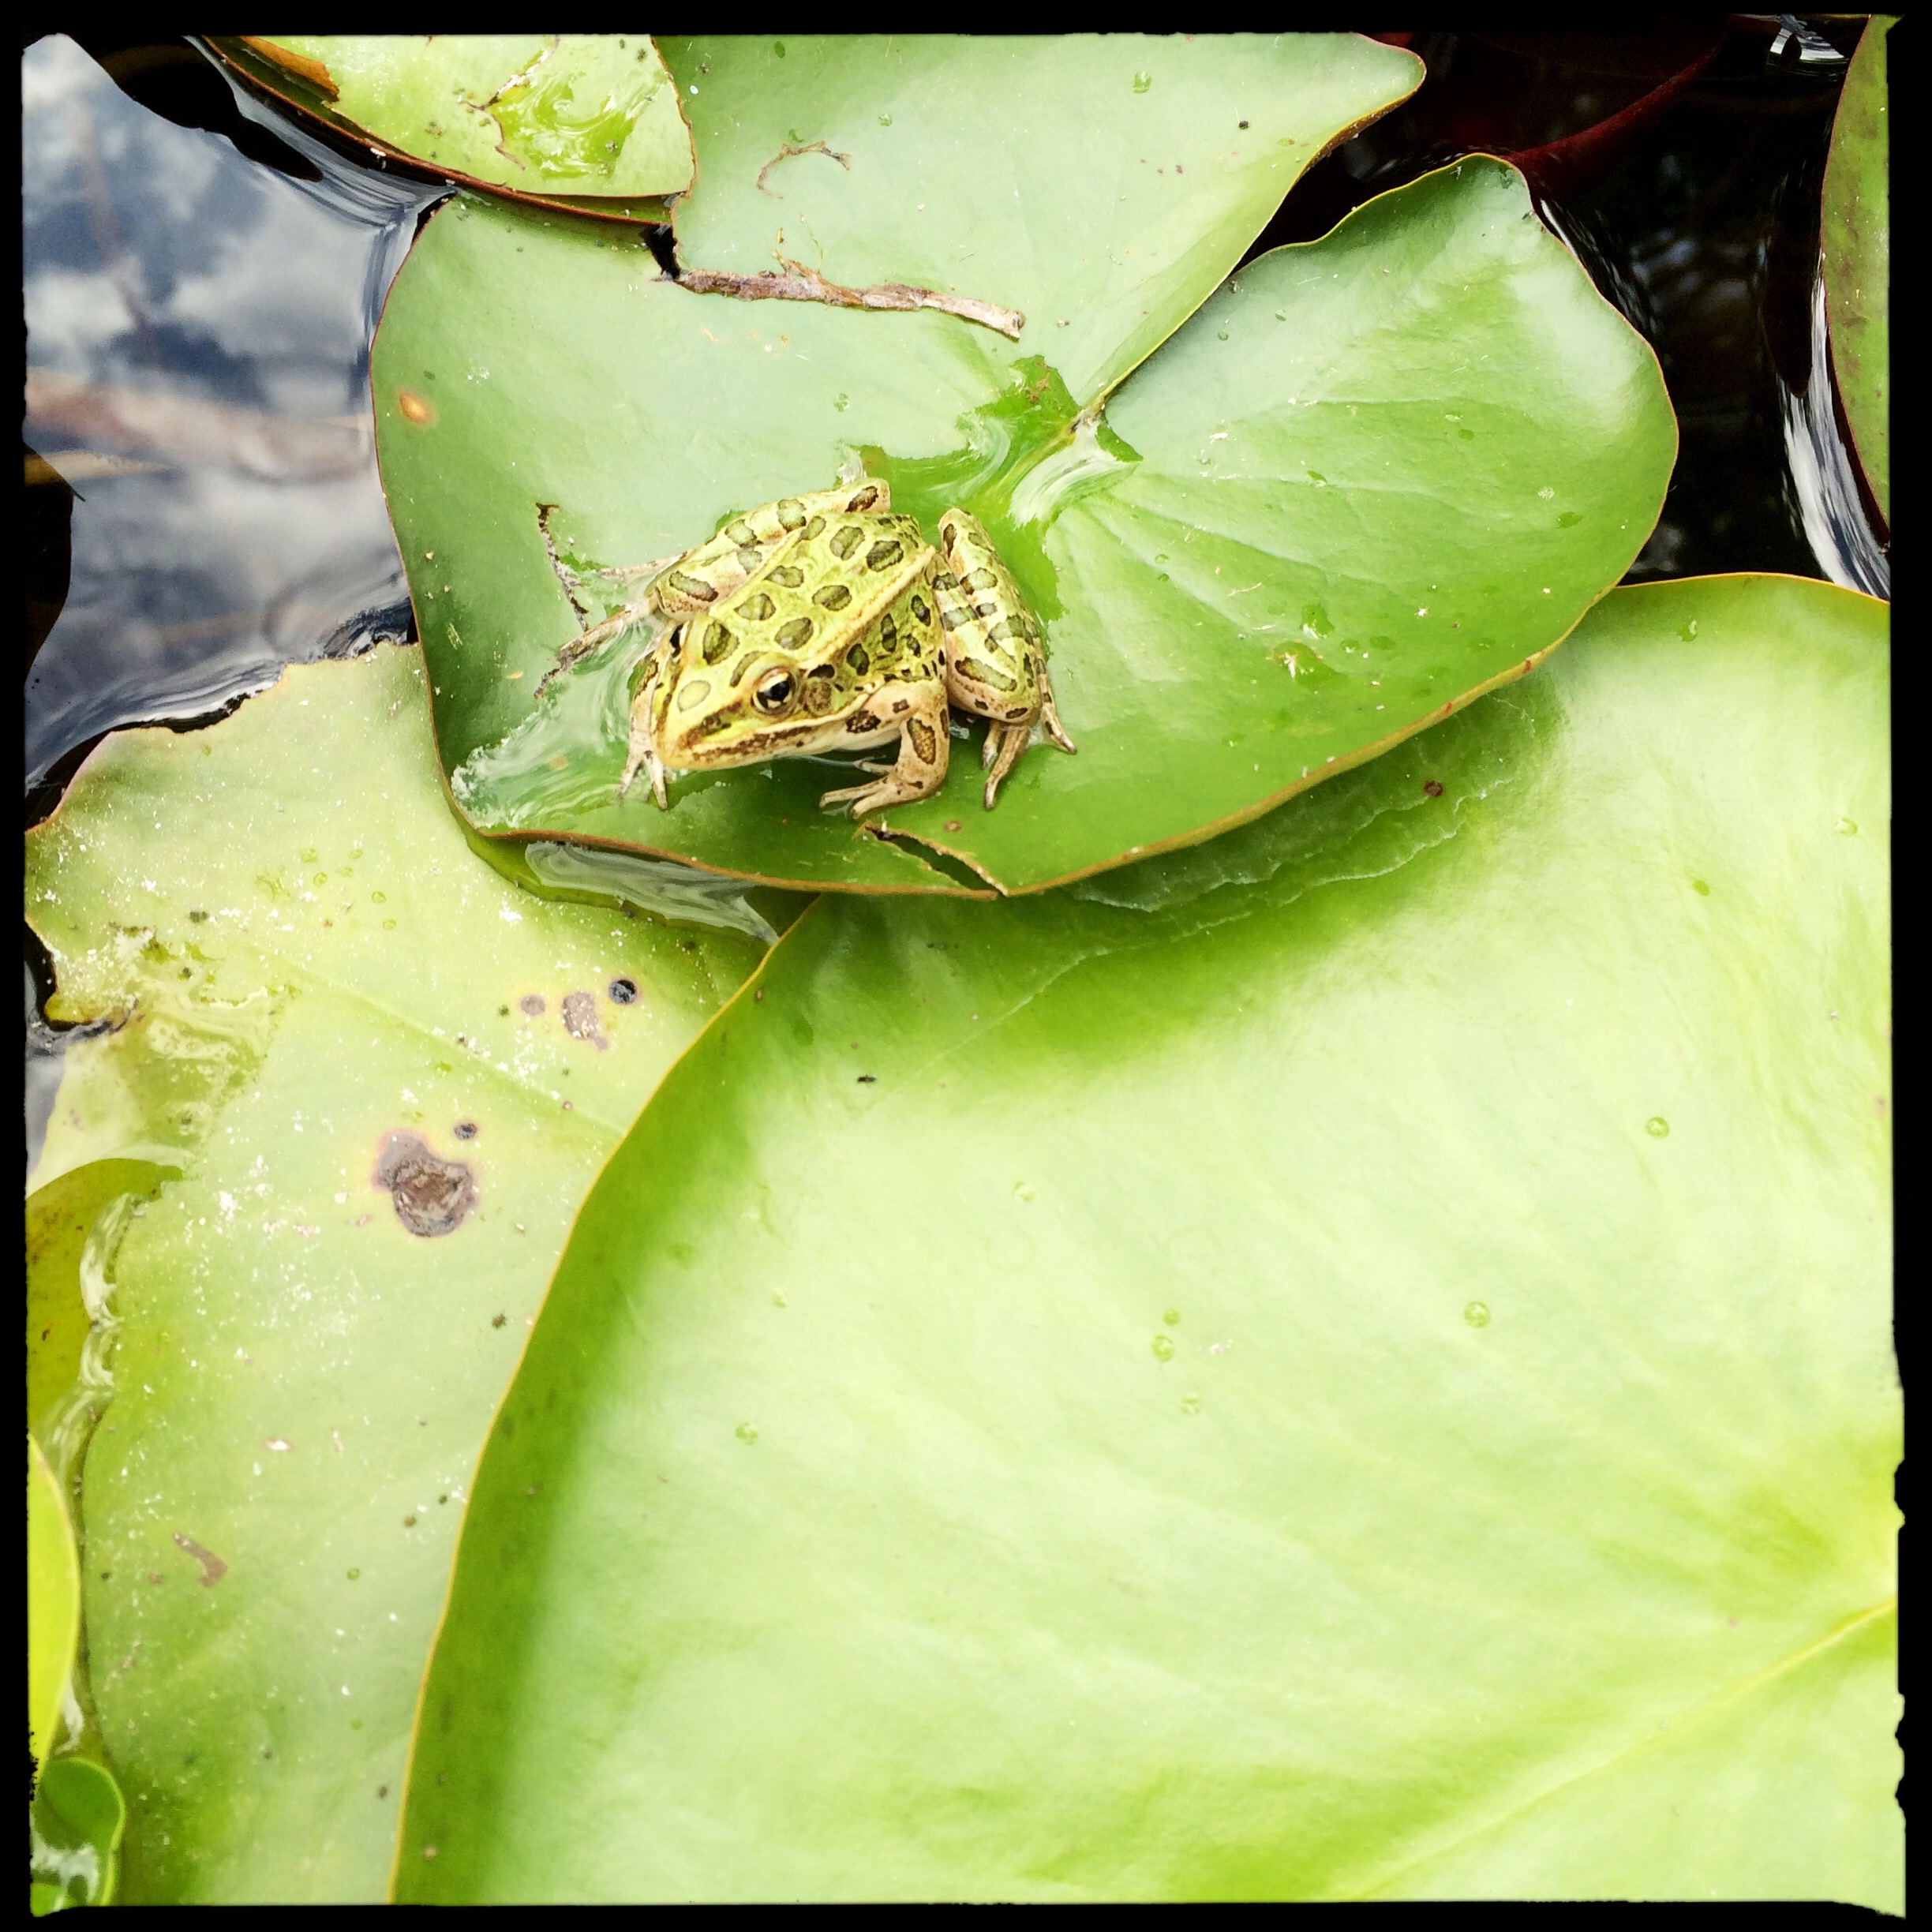 All the frog activity this spring has resulted in a delightful crop of baby leopard frogs hopping all about the pond for the past month.